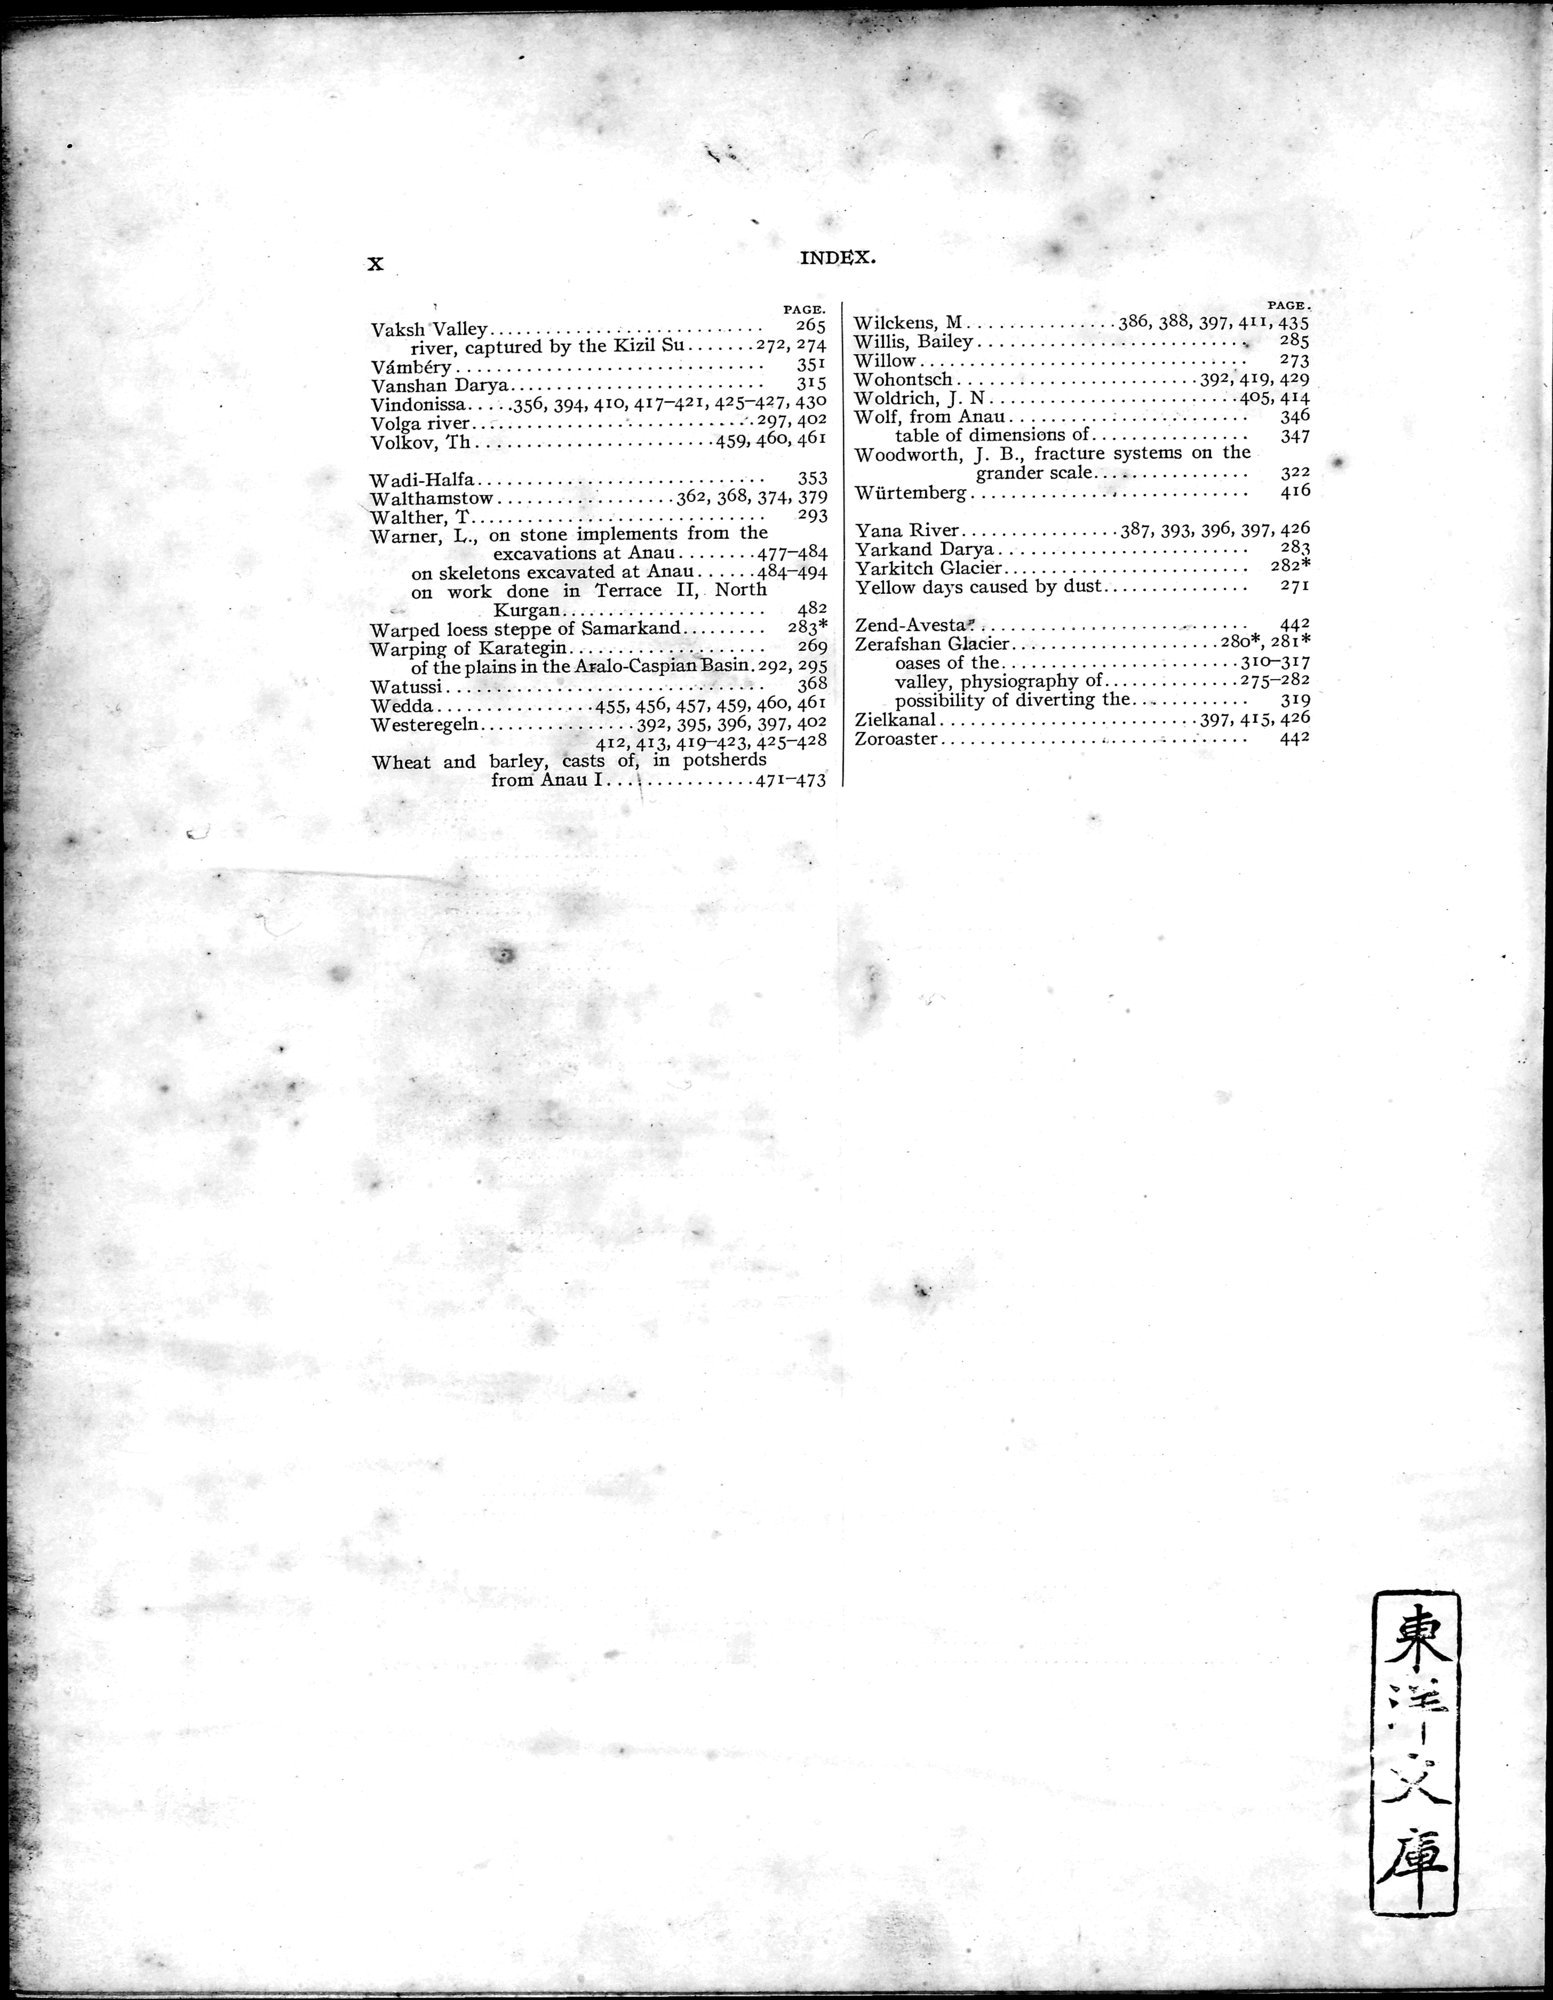 Explorations in Turkestan : Expedition of 1904 : vol.2 / Page 356 (Grayscale High Resolution Image)